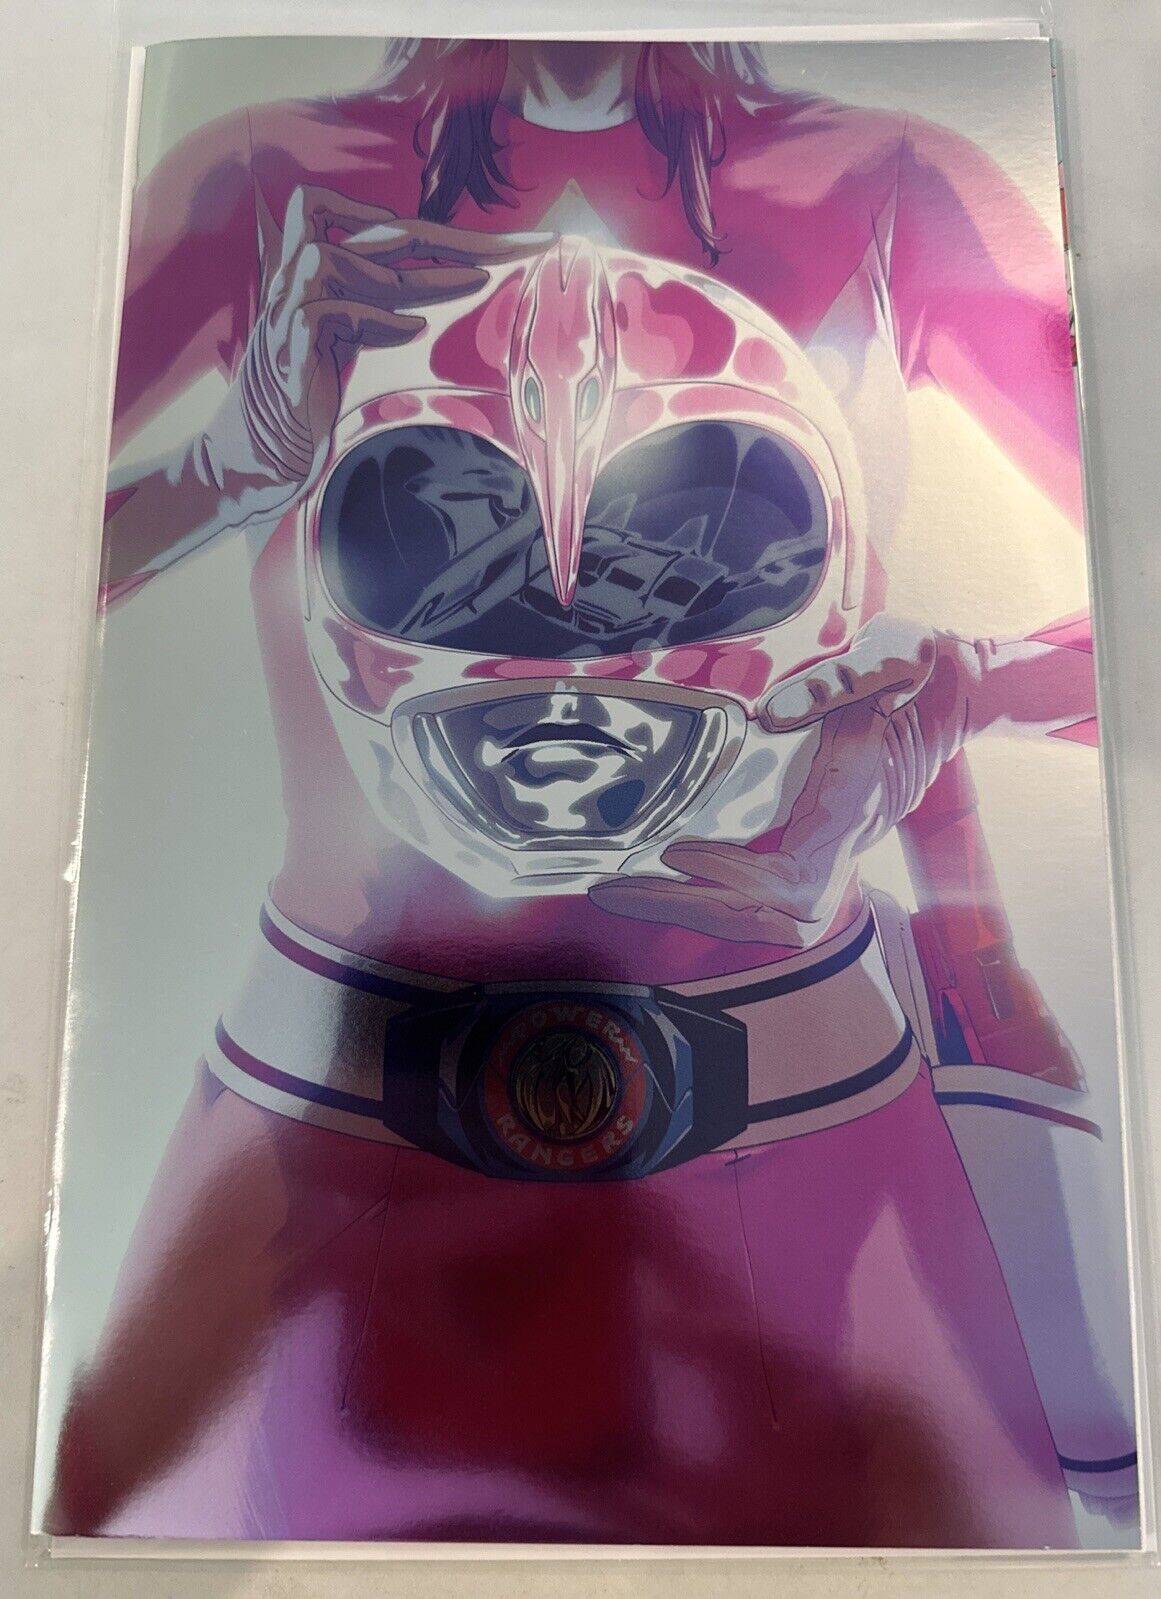 MIGHTY MORPHIN POWER RANGERS #42 PINK CHROME FOIL VARIANT Comic